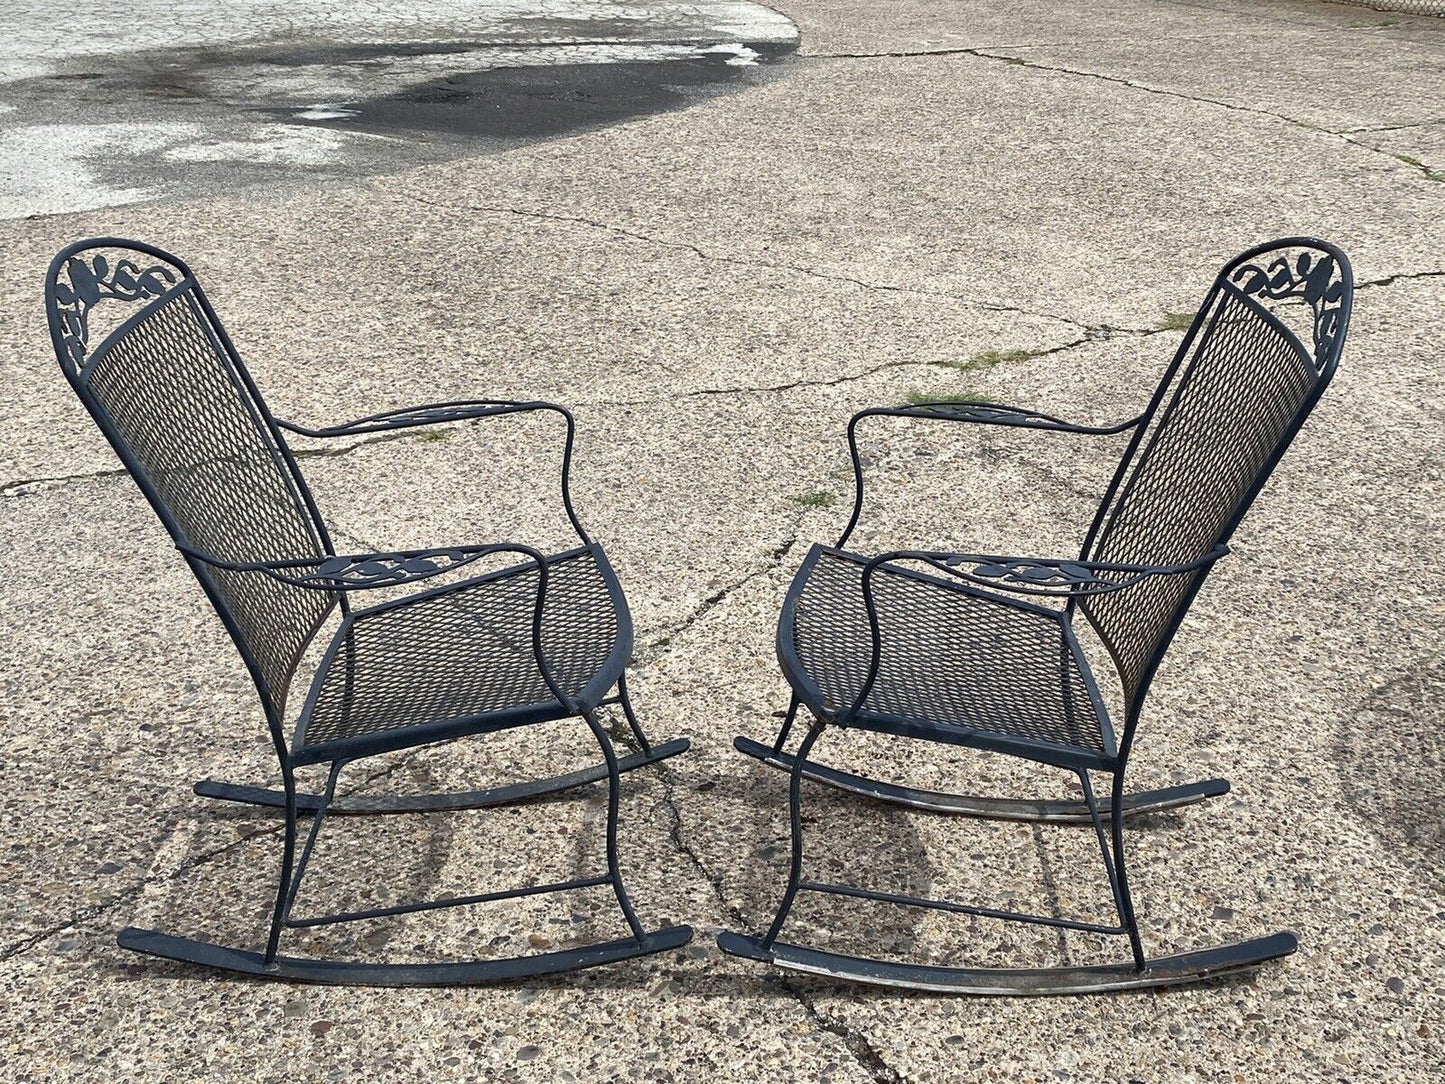 Vintage Wrought Iron Victorian Style Garden Patio Rocker Rocking Chairs - a Pair